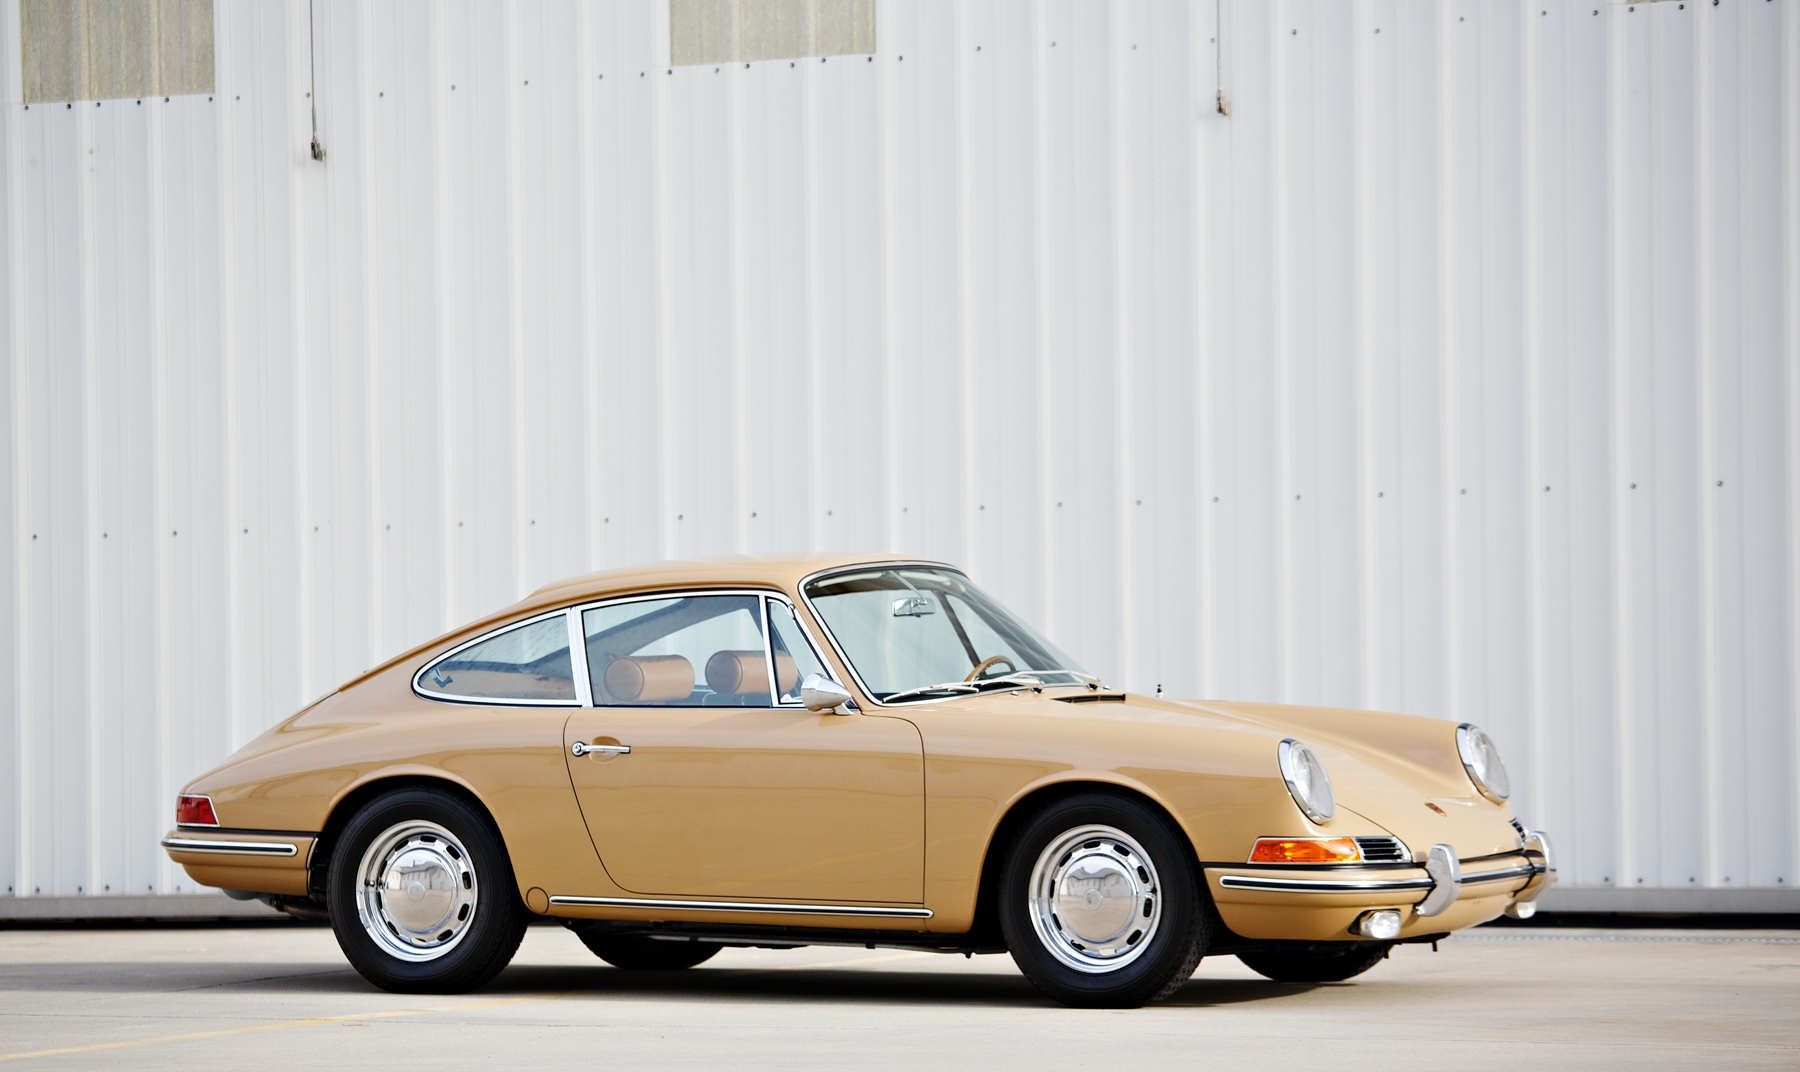 one of the 16 PORSCHES JERRY SEINFELD sold in 2016